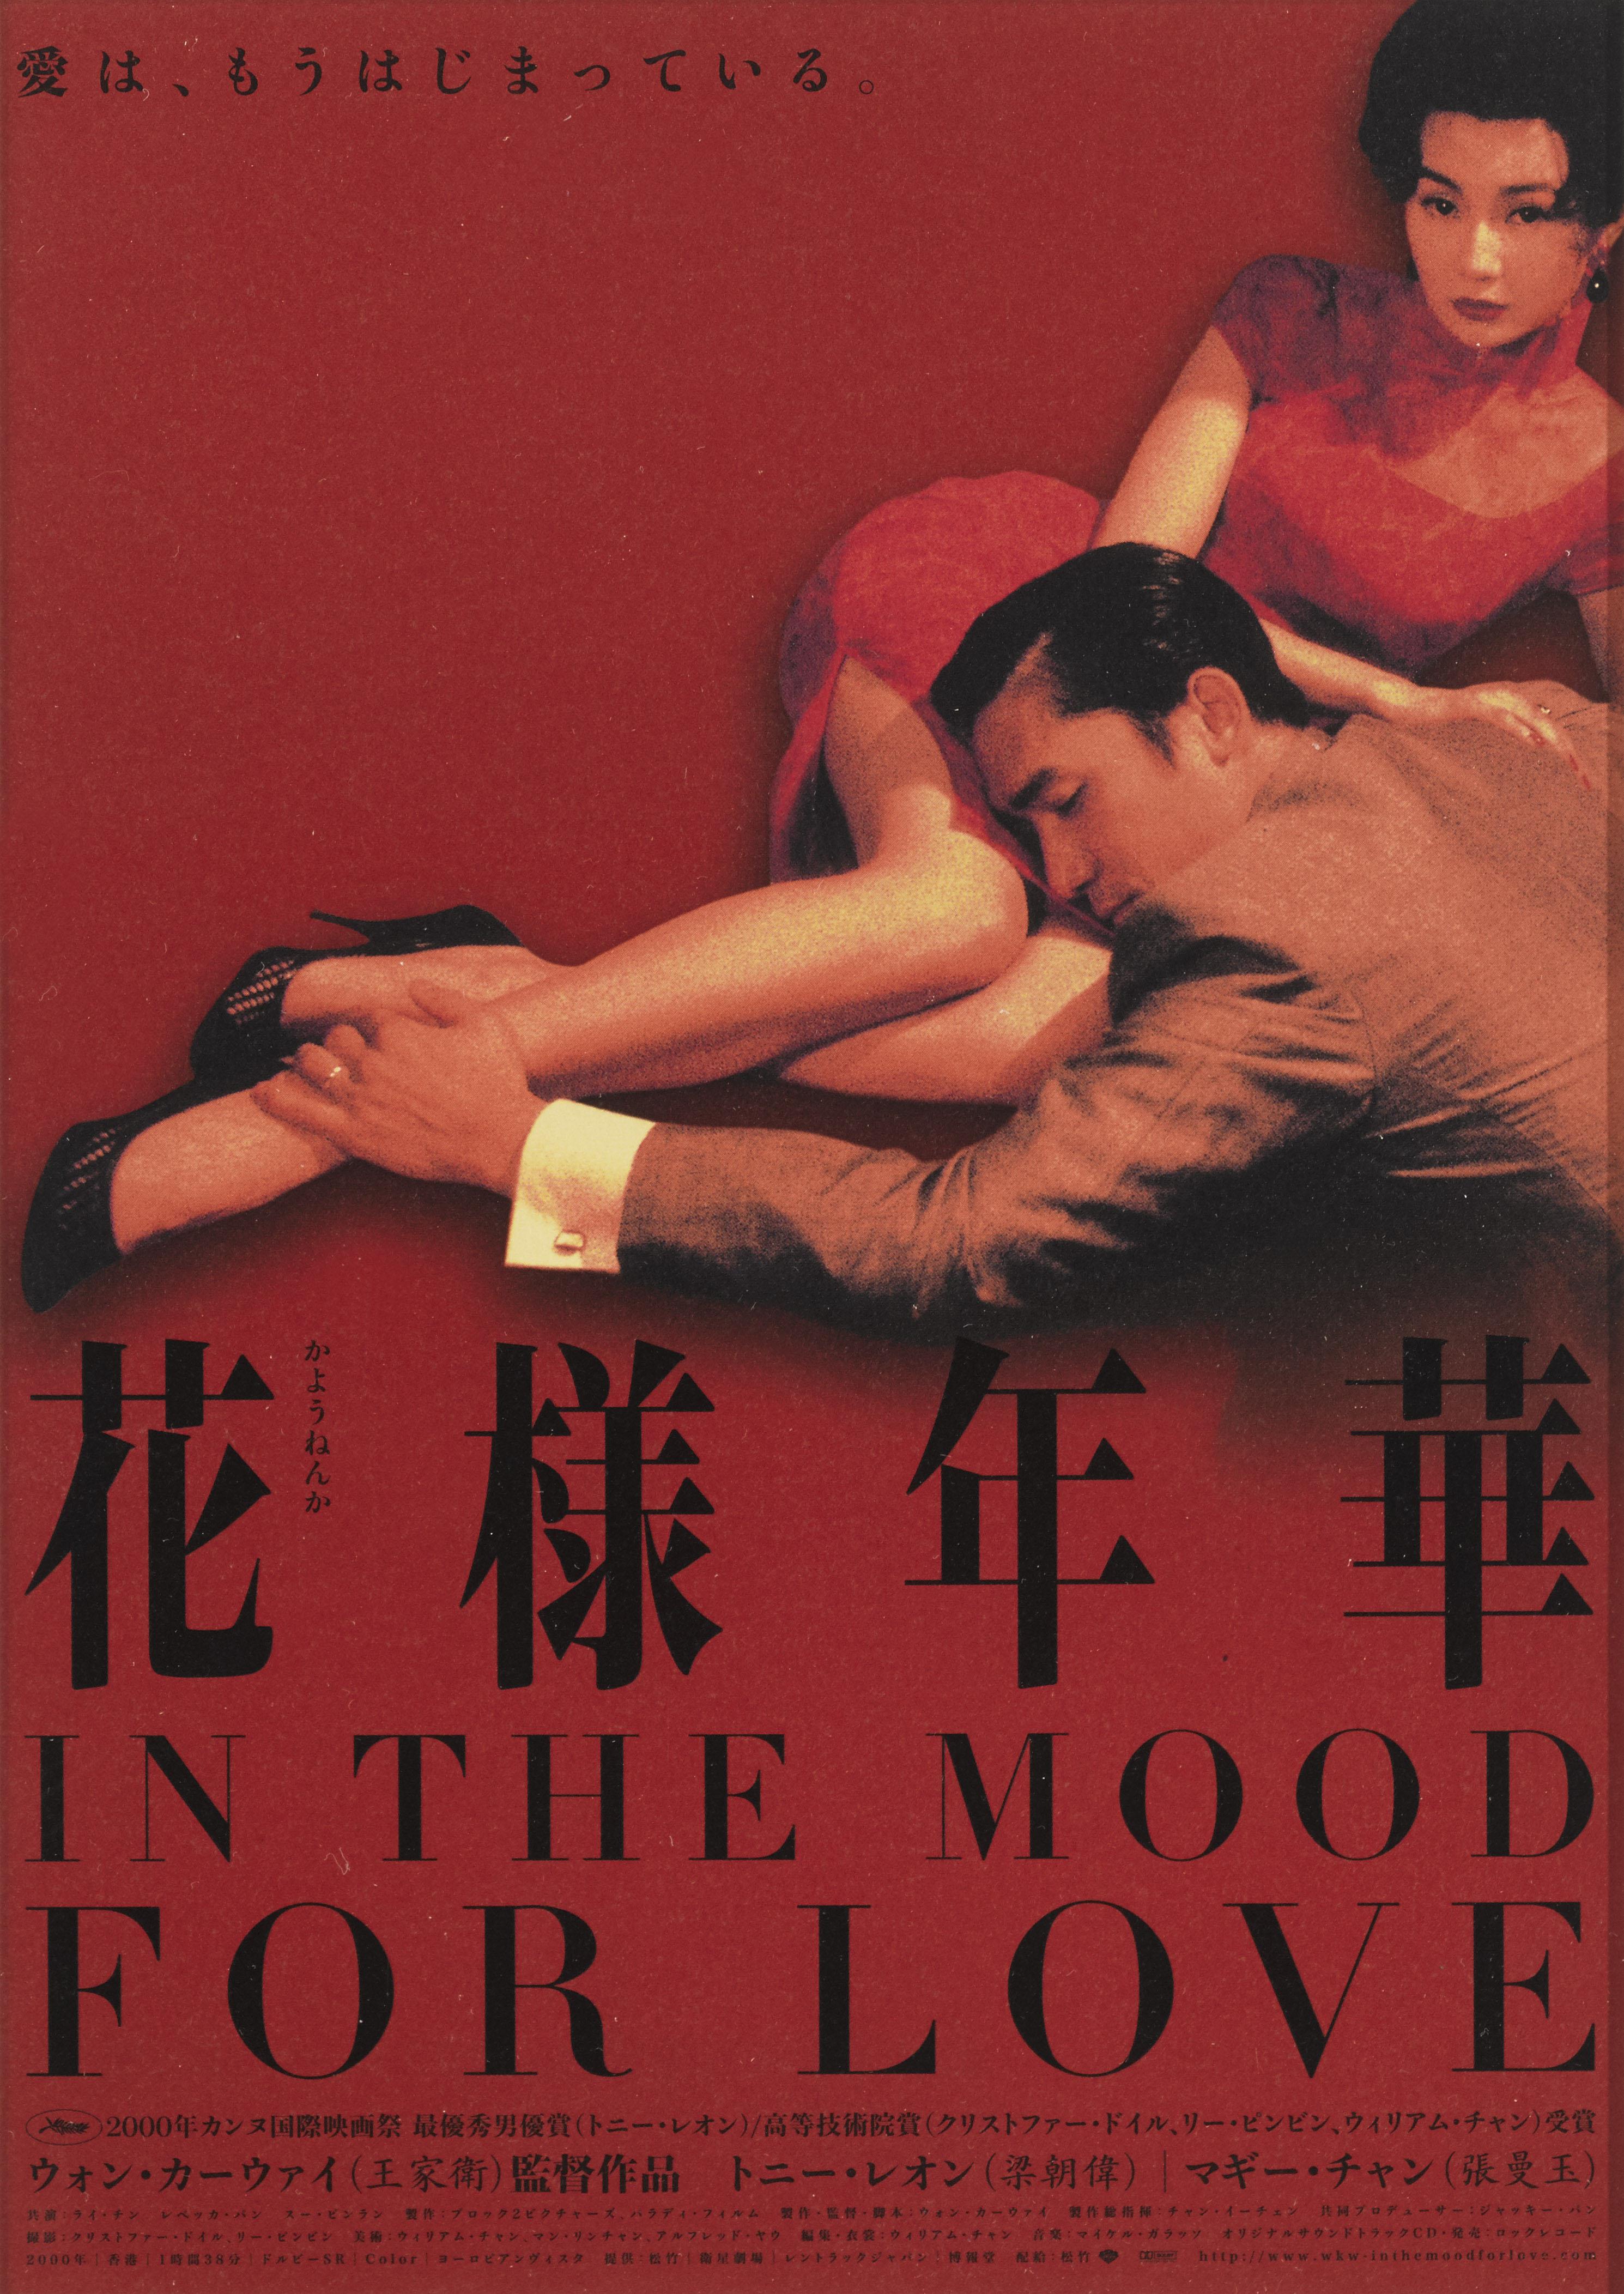 Original Japanese mini flyer poster for In the Mood for Love.
This film was directed by Kar Wai Wong and starred TTony Chiu-Wai Leung, Maggie Cheung and Siu Ping-Lam.
This piece is This poster is conservation paper backed and conservation framed